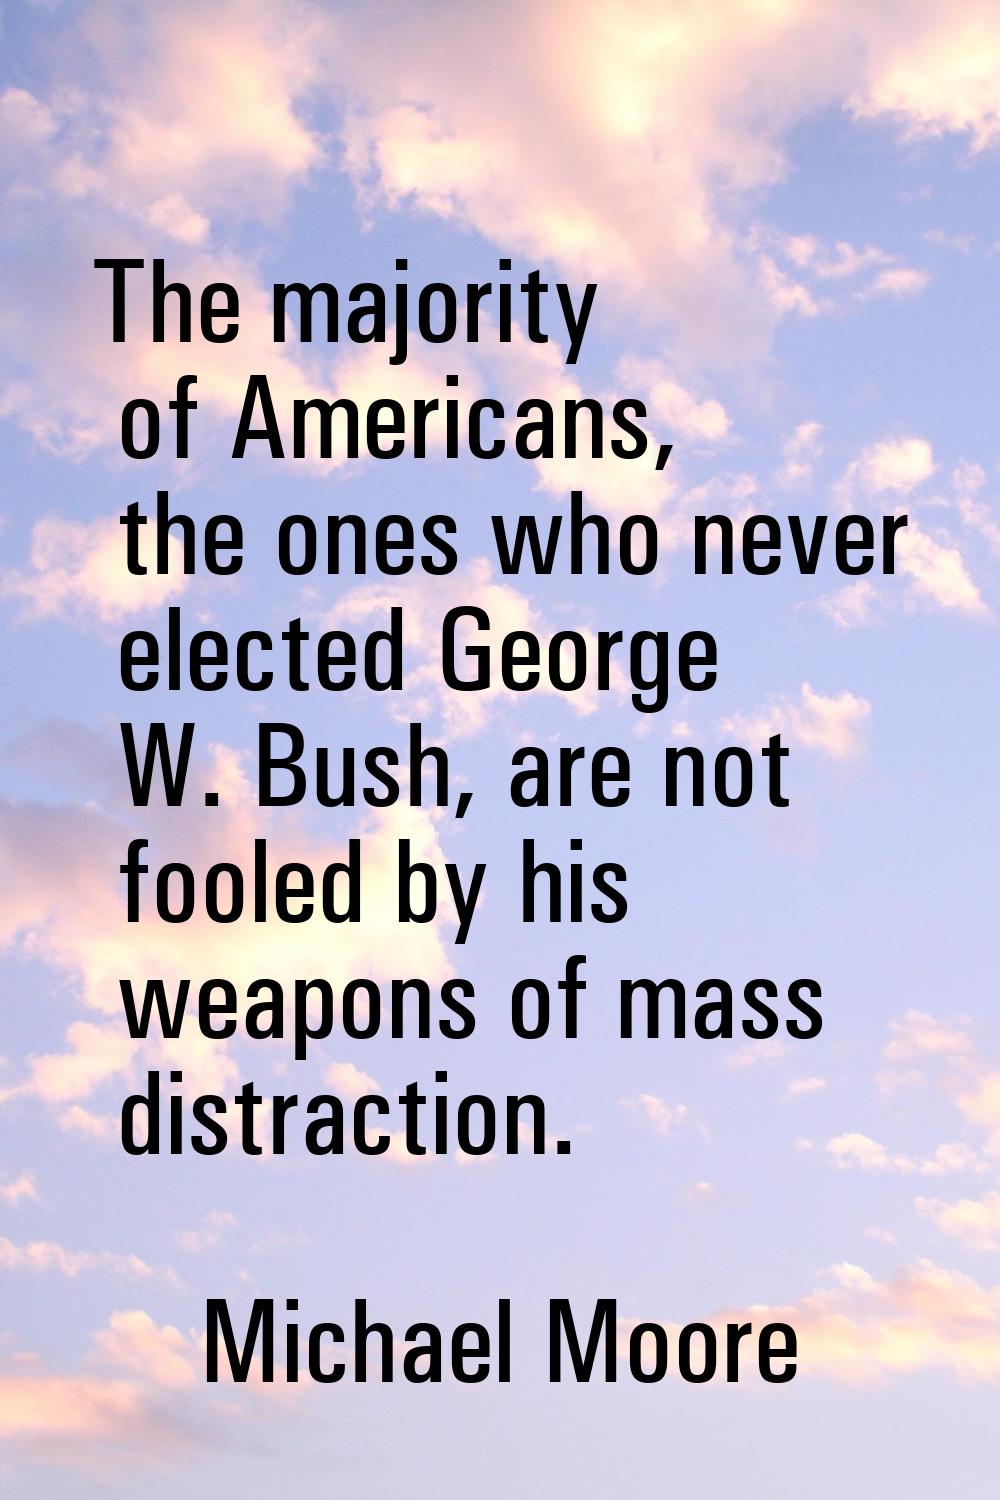 The majority of Americans, the ones who never elected George W. Bush, are not fooled by his weapons